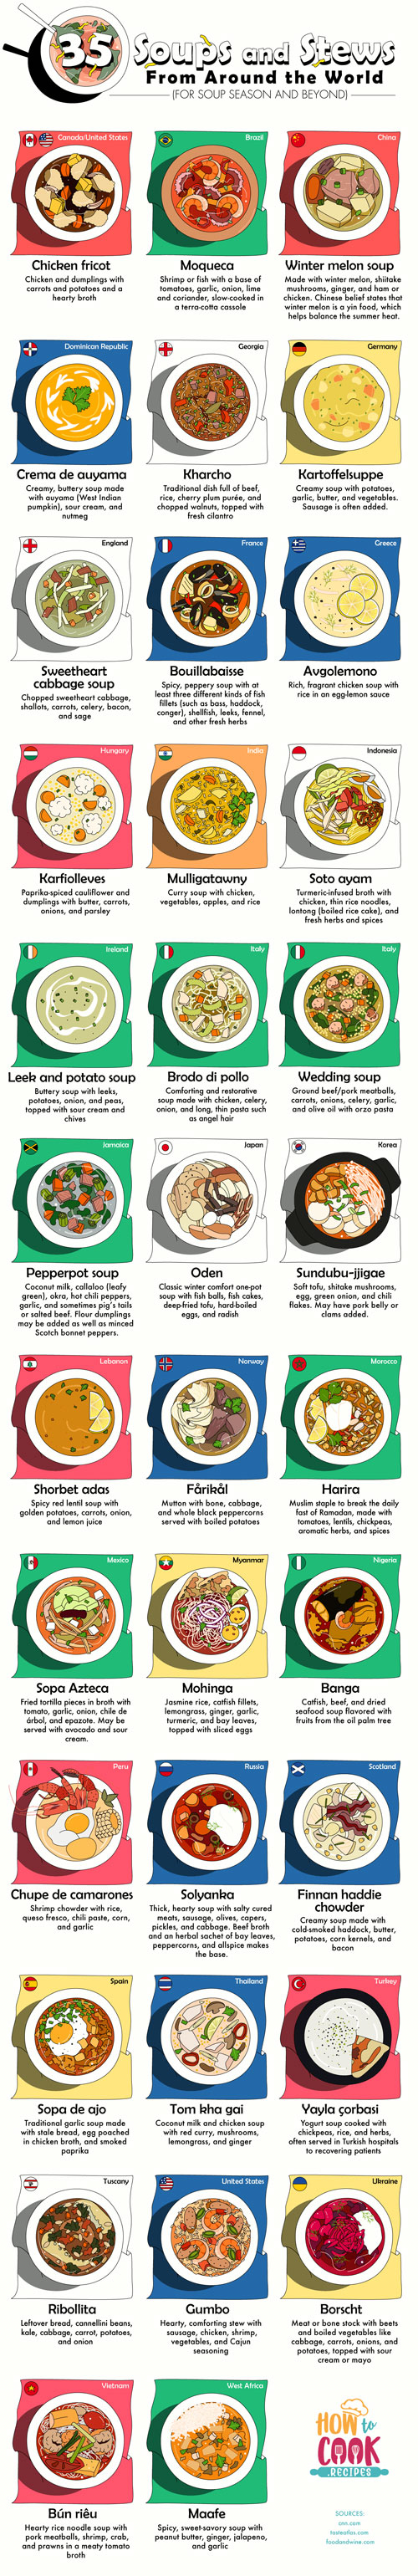 35 Soups & Stews from Around the World [Infographic] - Best Infographics